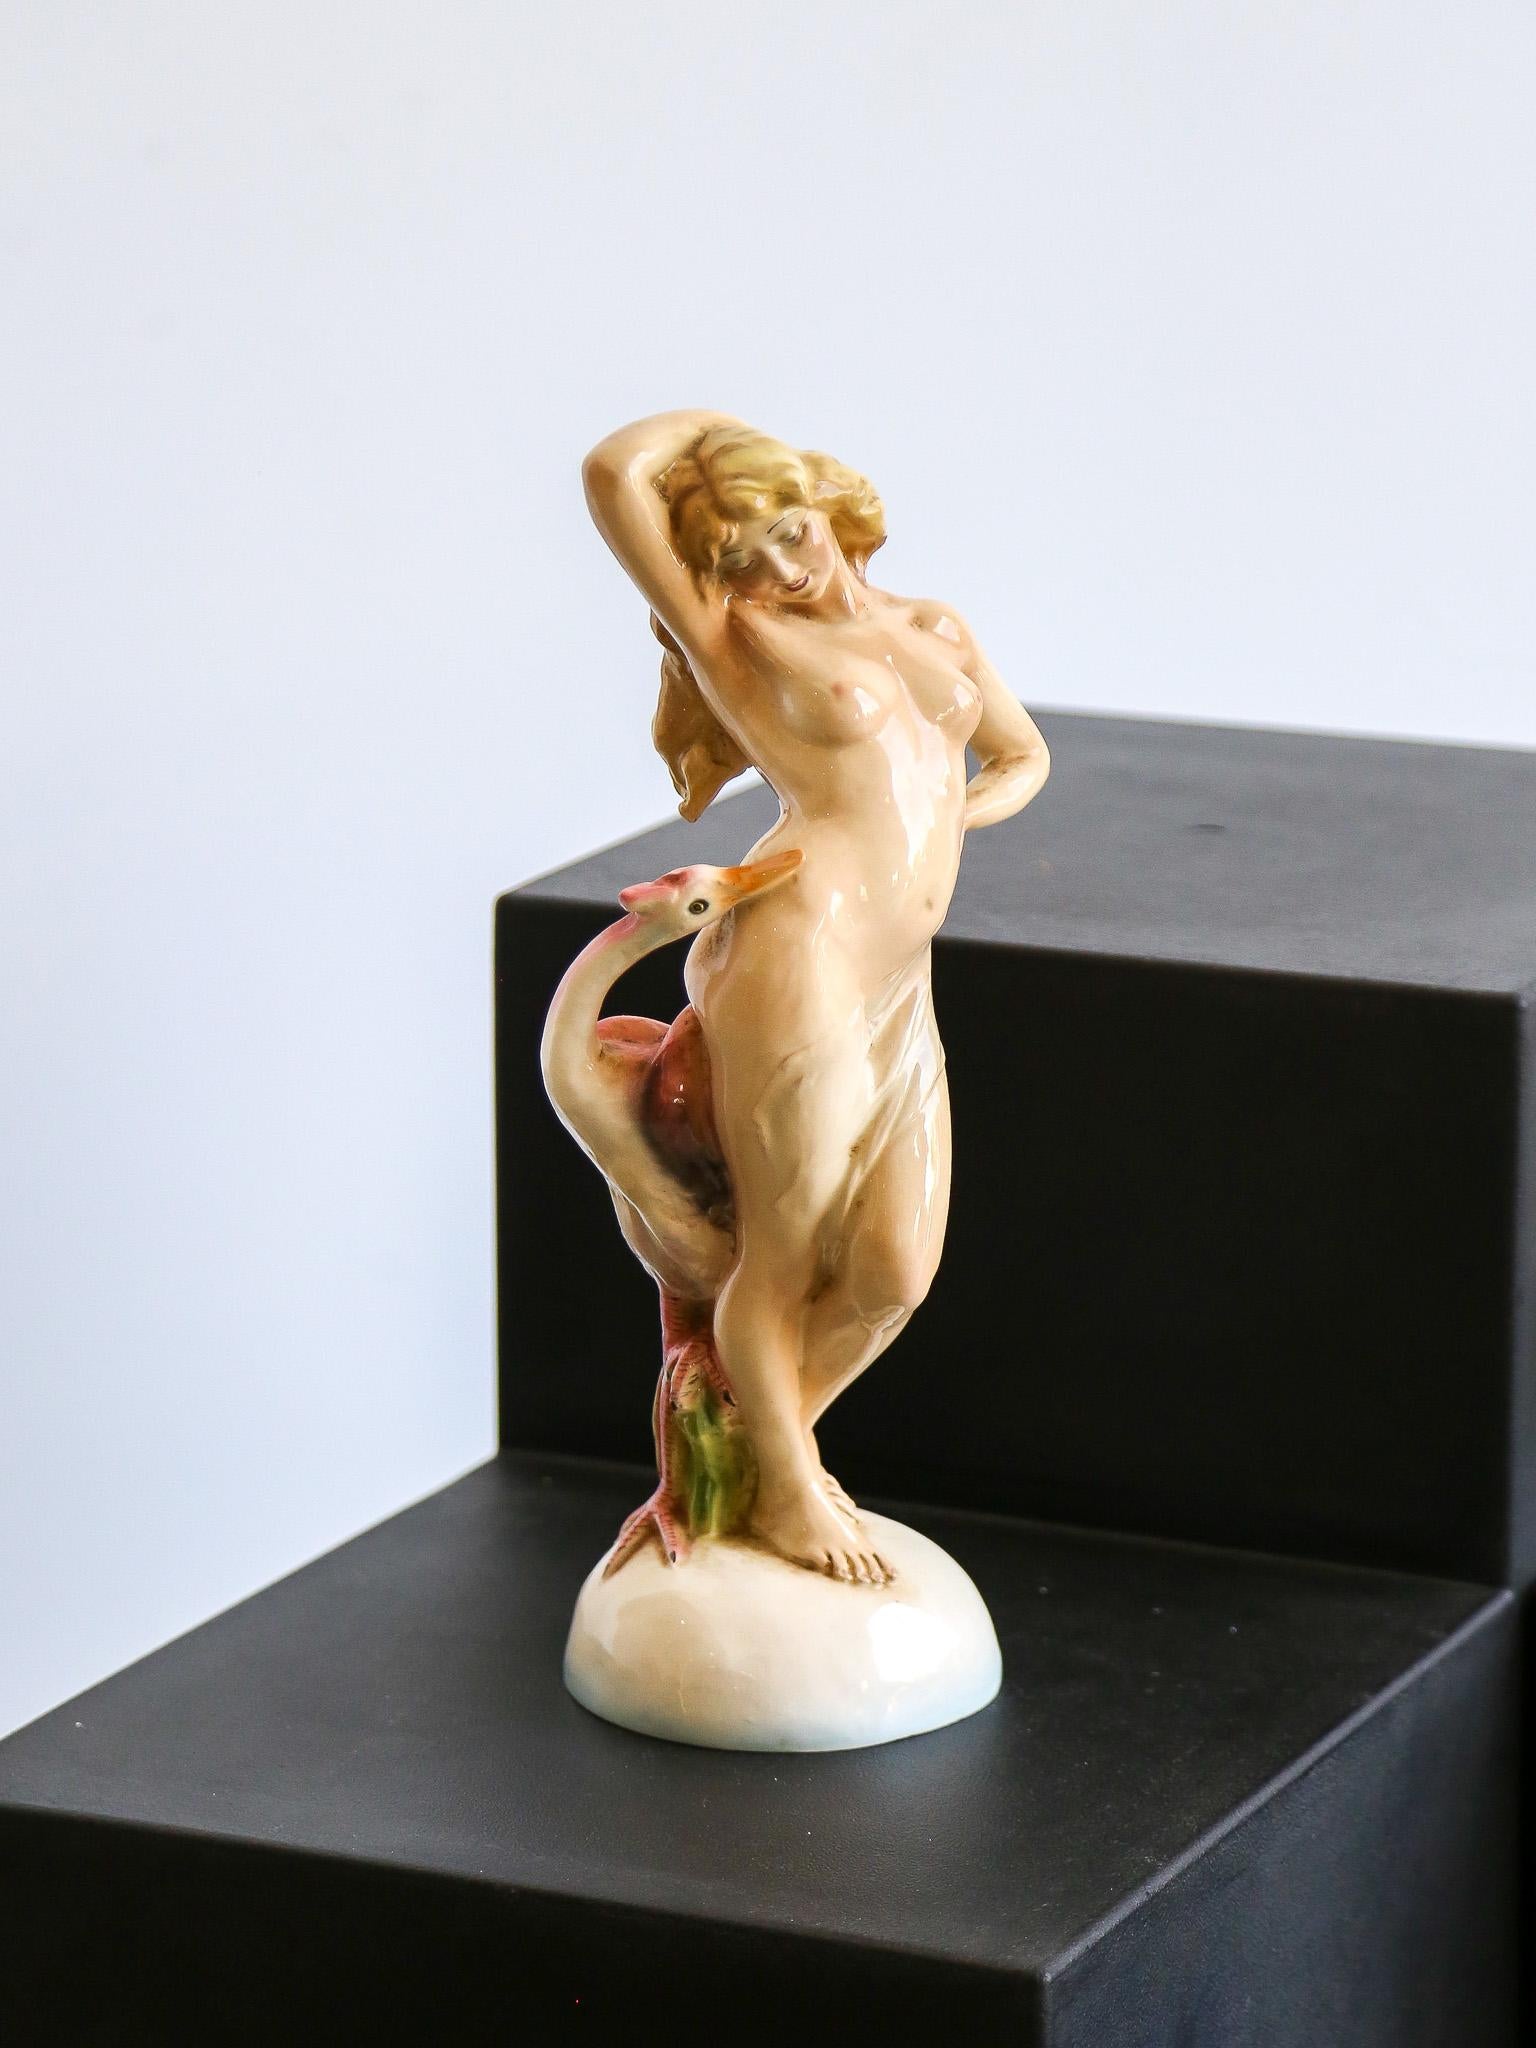 Italian Mid Century Modern hand painted women sculpture.


Place of Origin: Italy
Date of Manufacture: 1950s
In style: Mid Century Modern
Materials & Techniques: Ceramic 
Condition: Good condition, wear consistent with the age